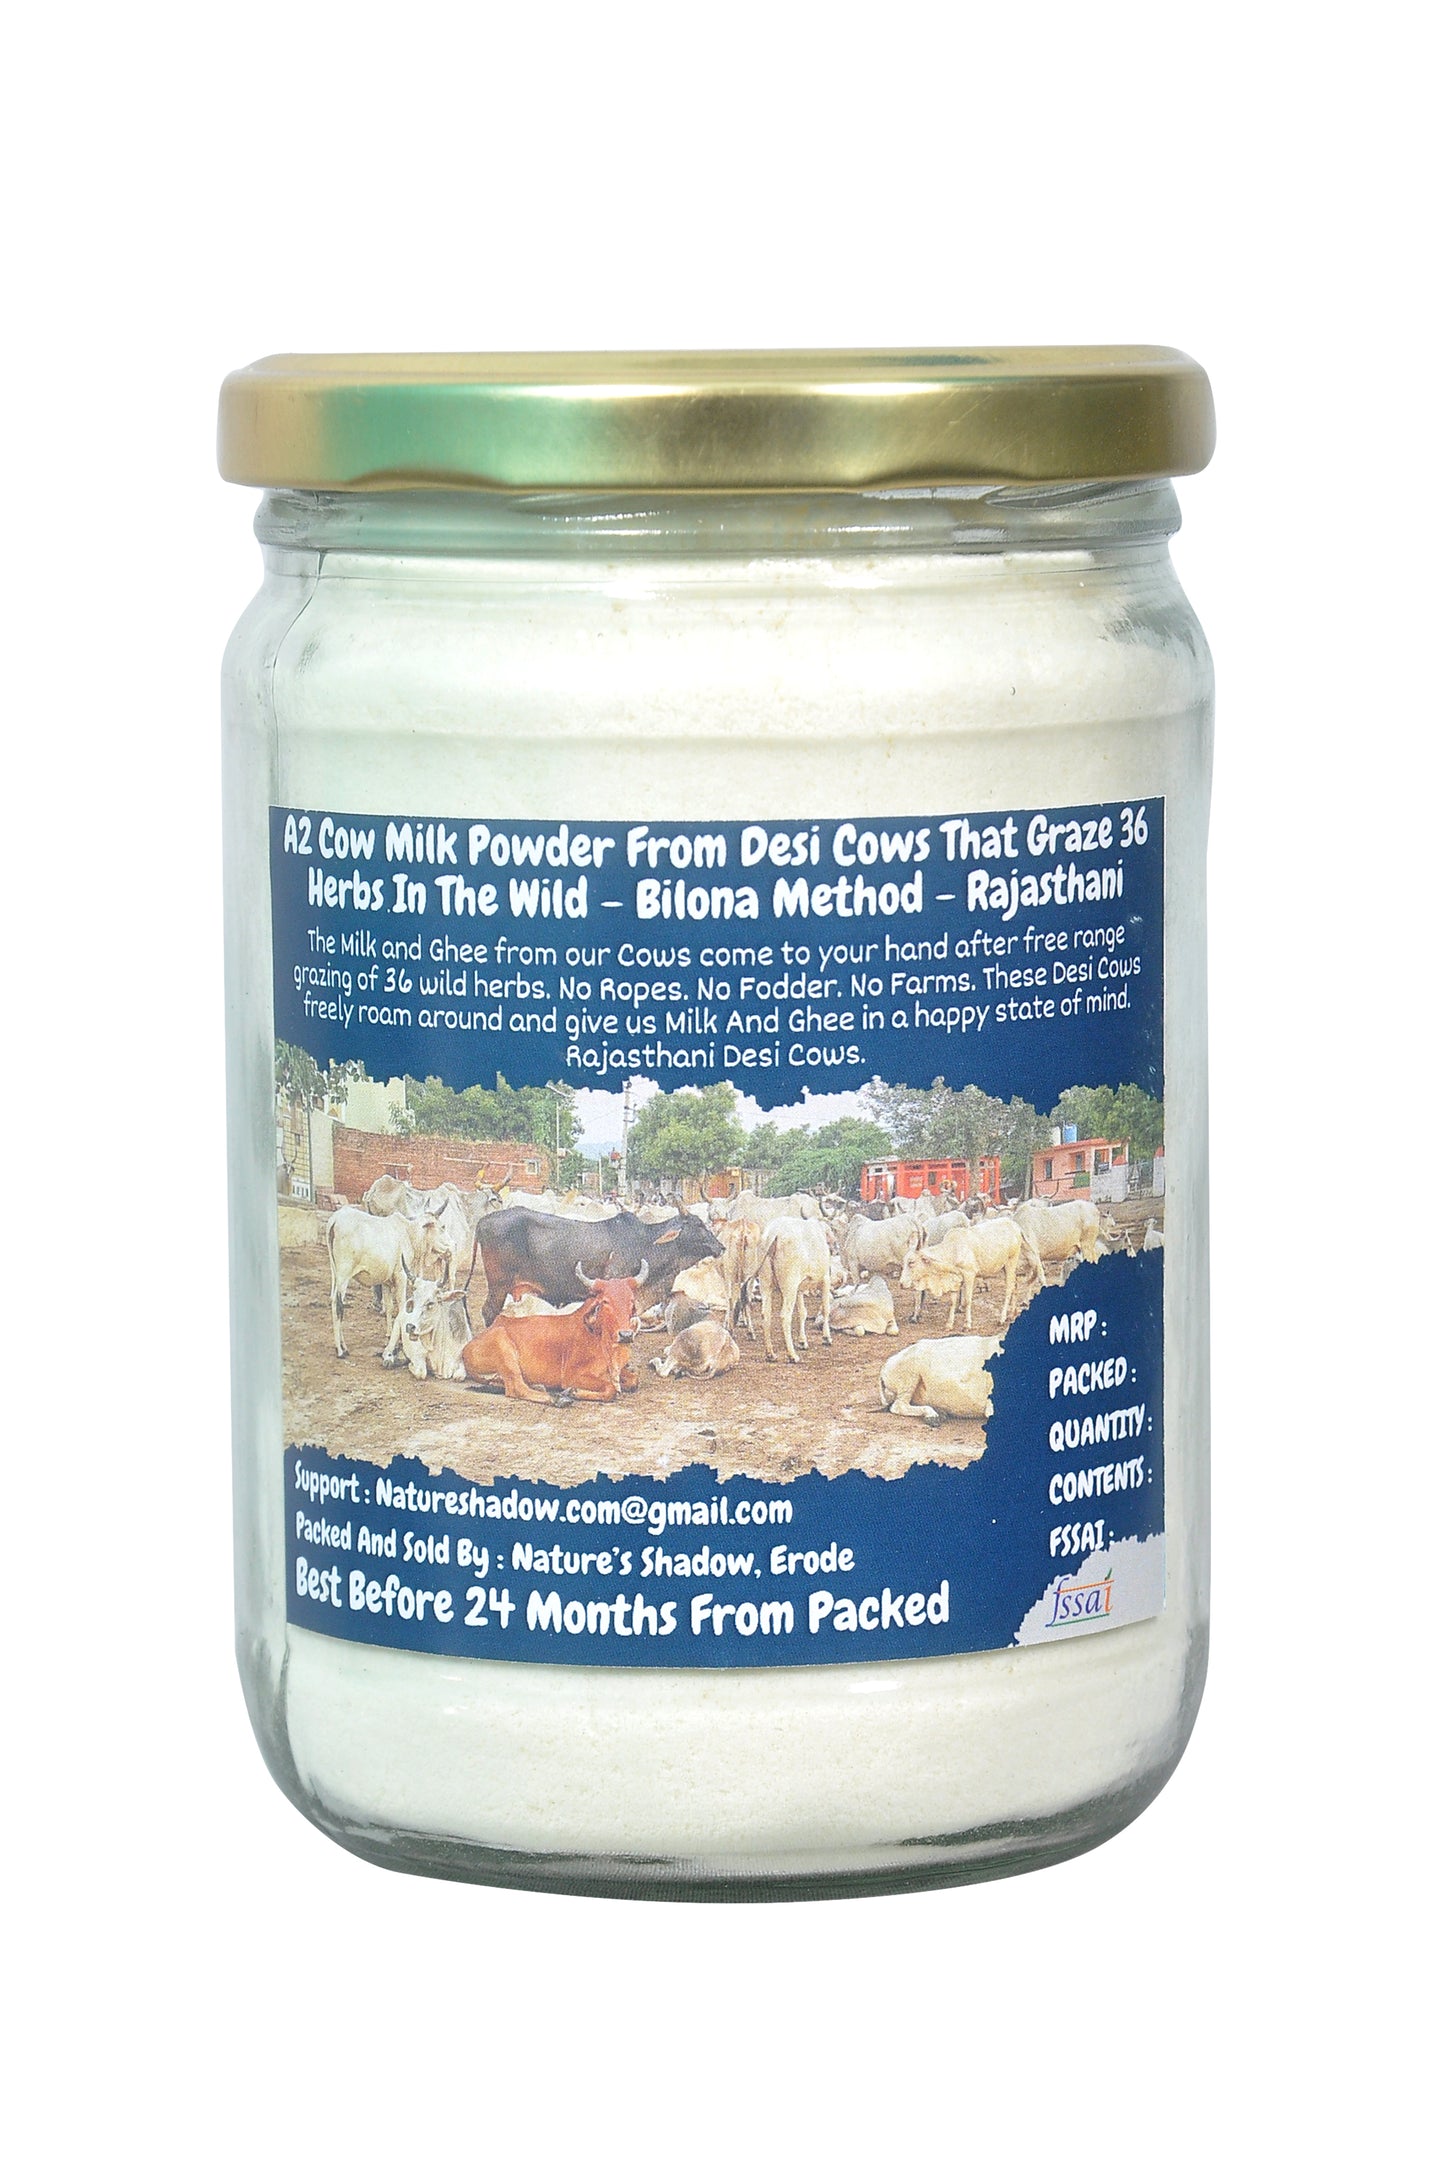 A2 Gir Cow Milk Powder From Rajasthan - These Cows Graze 36 Herbs From The Wild